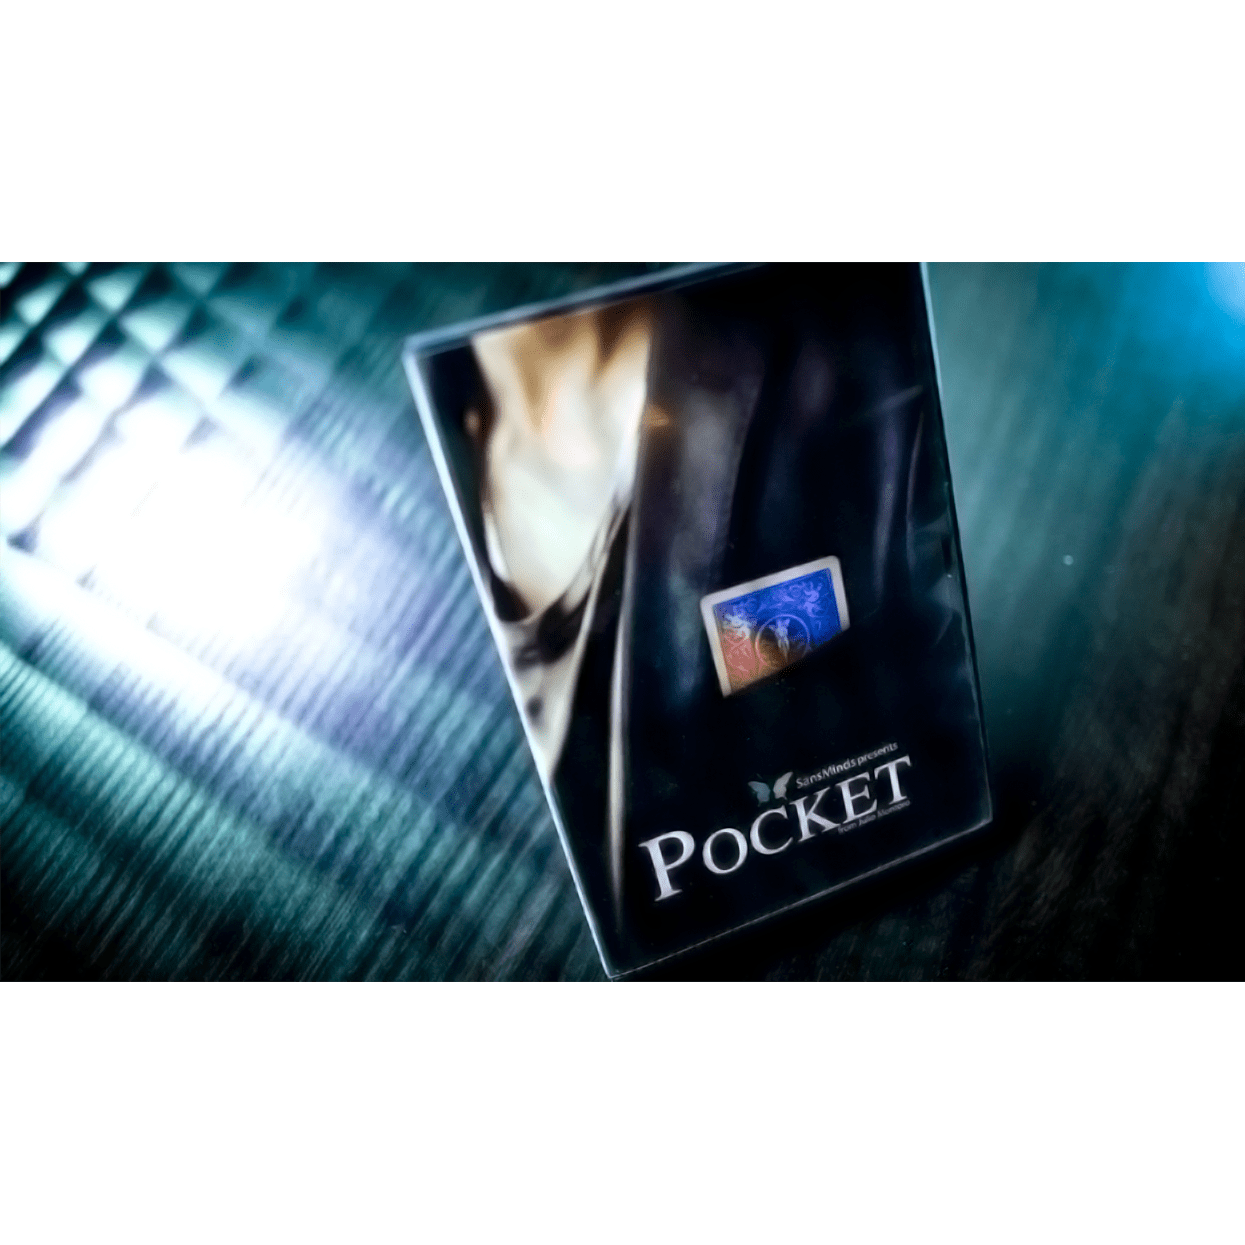 Pocket (DVD and Gimmick) by Julio Montoro and SansMinds - DVD